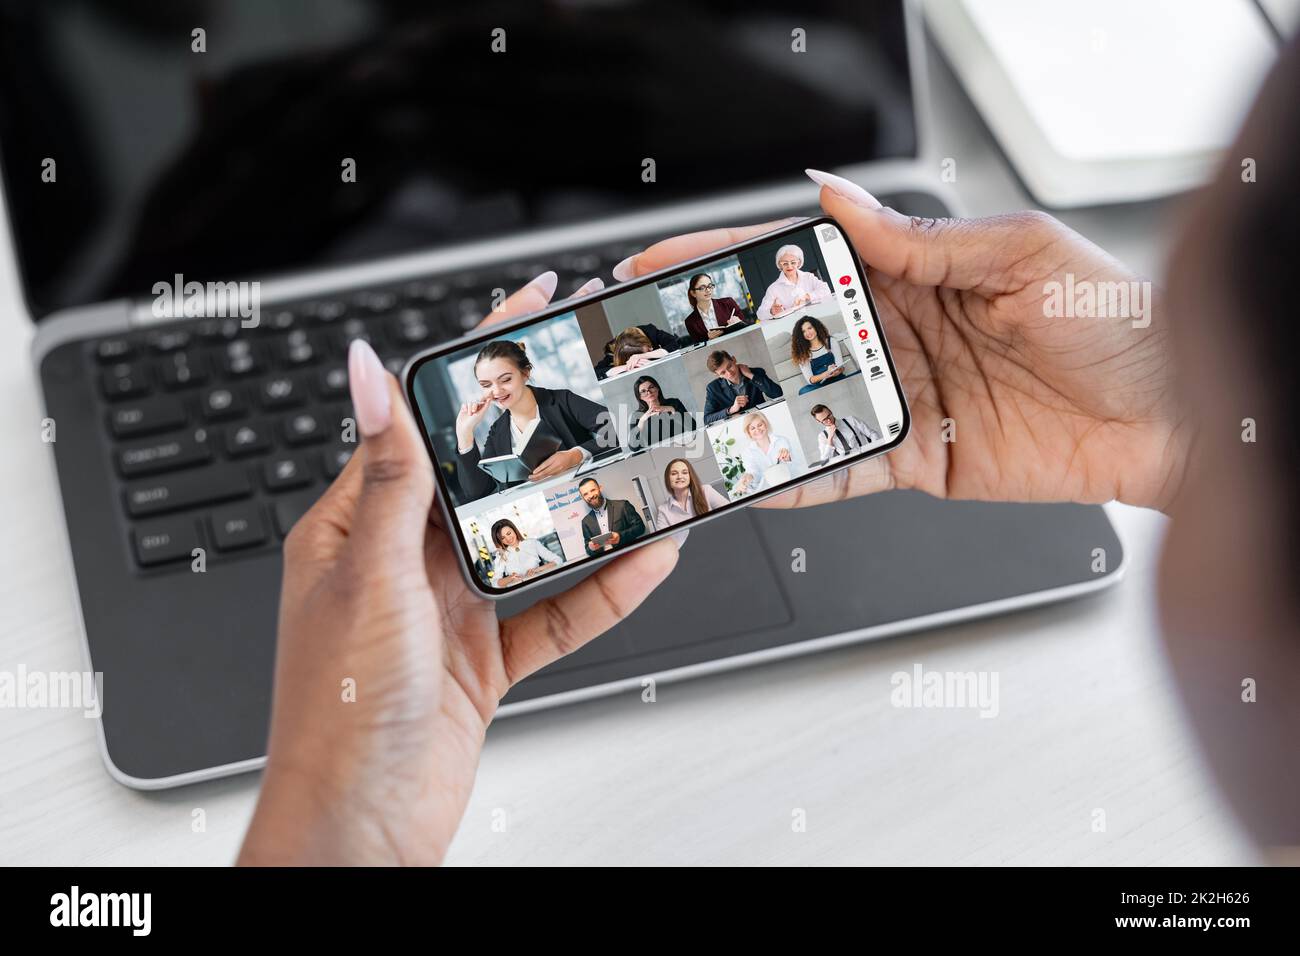 Business teleconference. Mobile video call. Virtual interview. Communication technology. Woman cooperating online with team on smartphone screen. Stock Photo